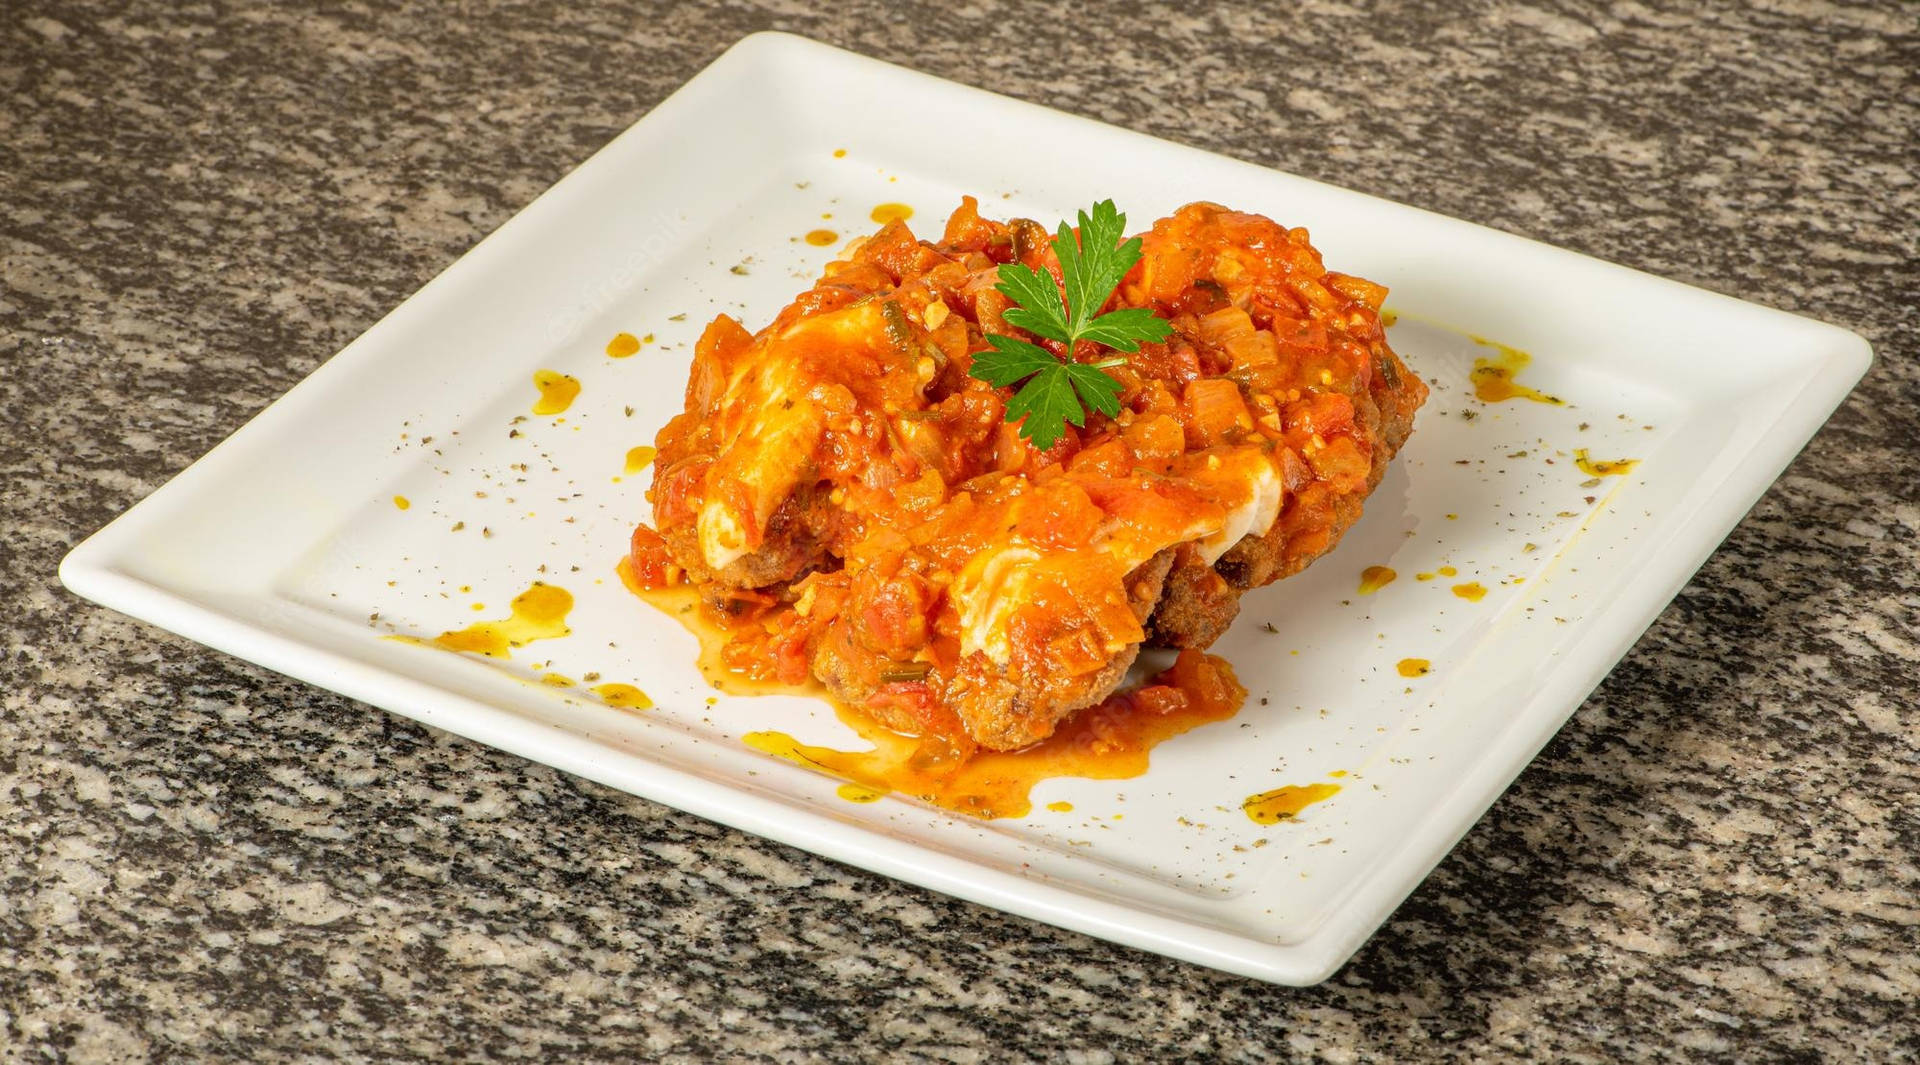 Delectable Chicken Parmigiana Loaded with Tomato Sauce Wallpaper